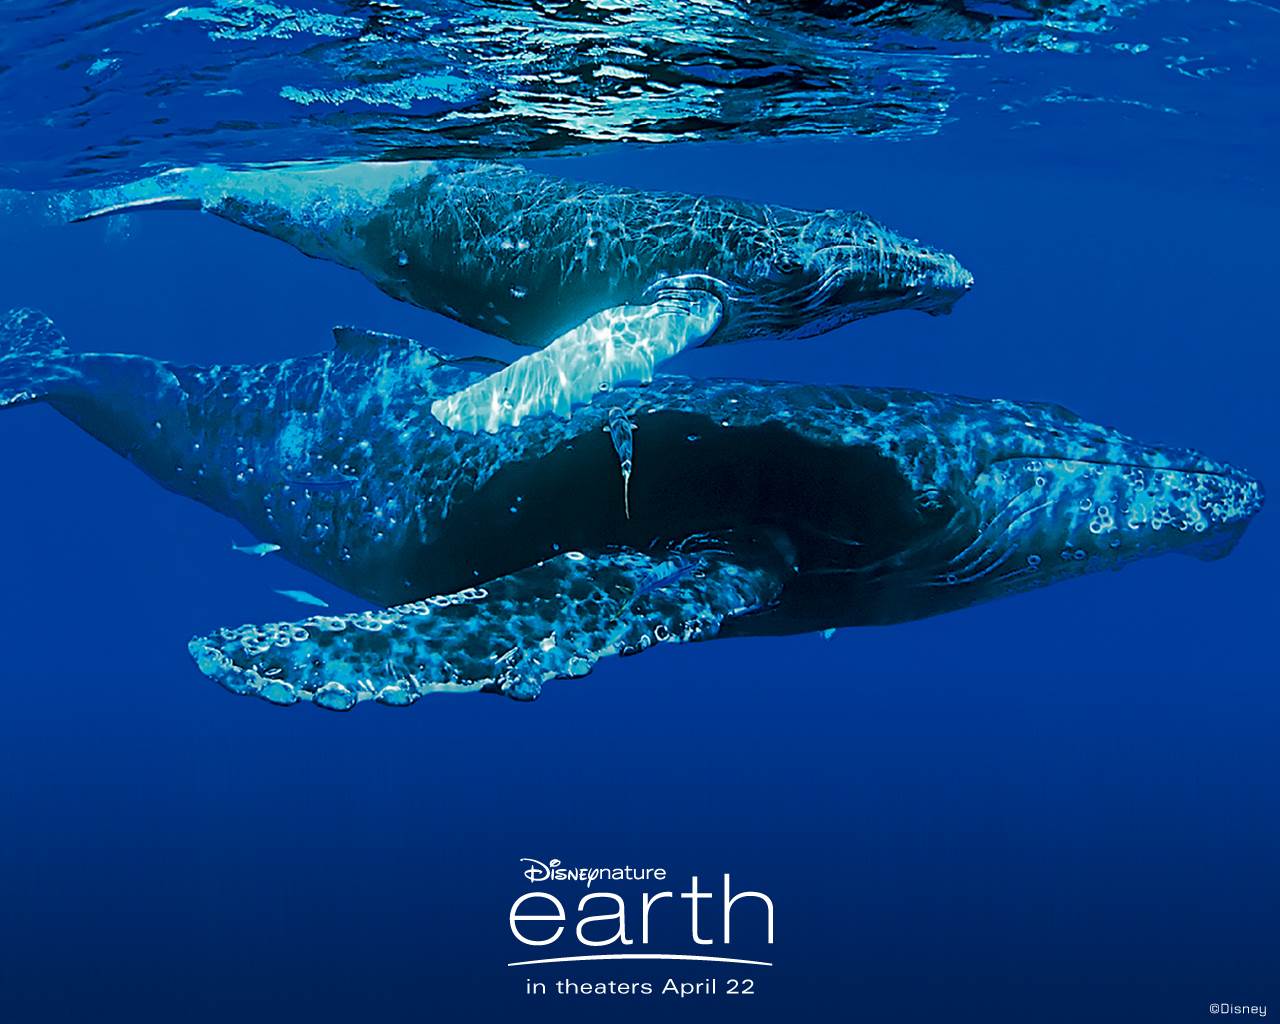 Download The Whale Earth Wallpaper, Whale Earth Iphone - Disney Nature Earth - HD Wallpaper 